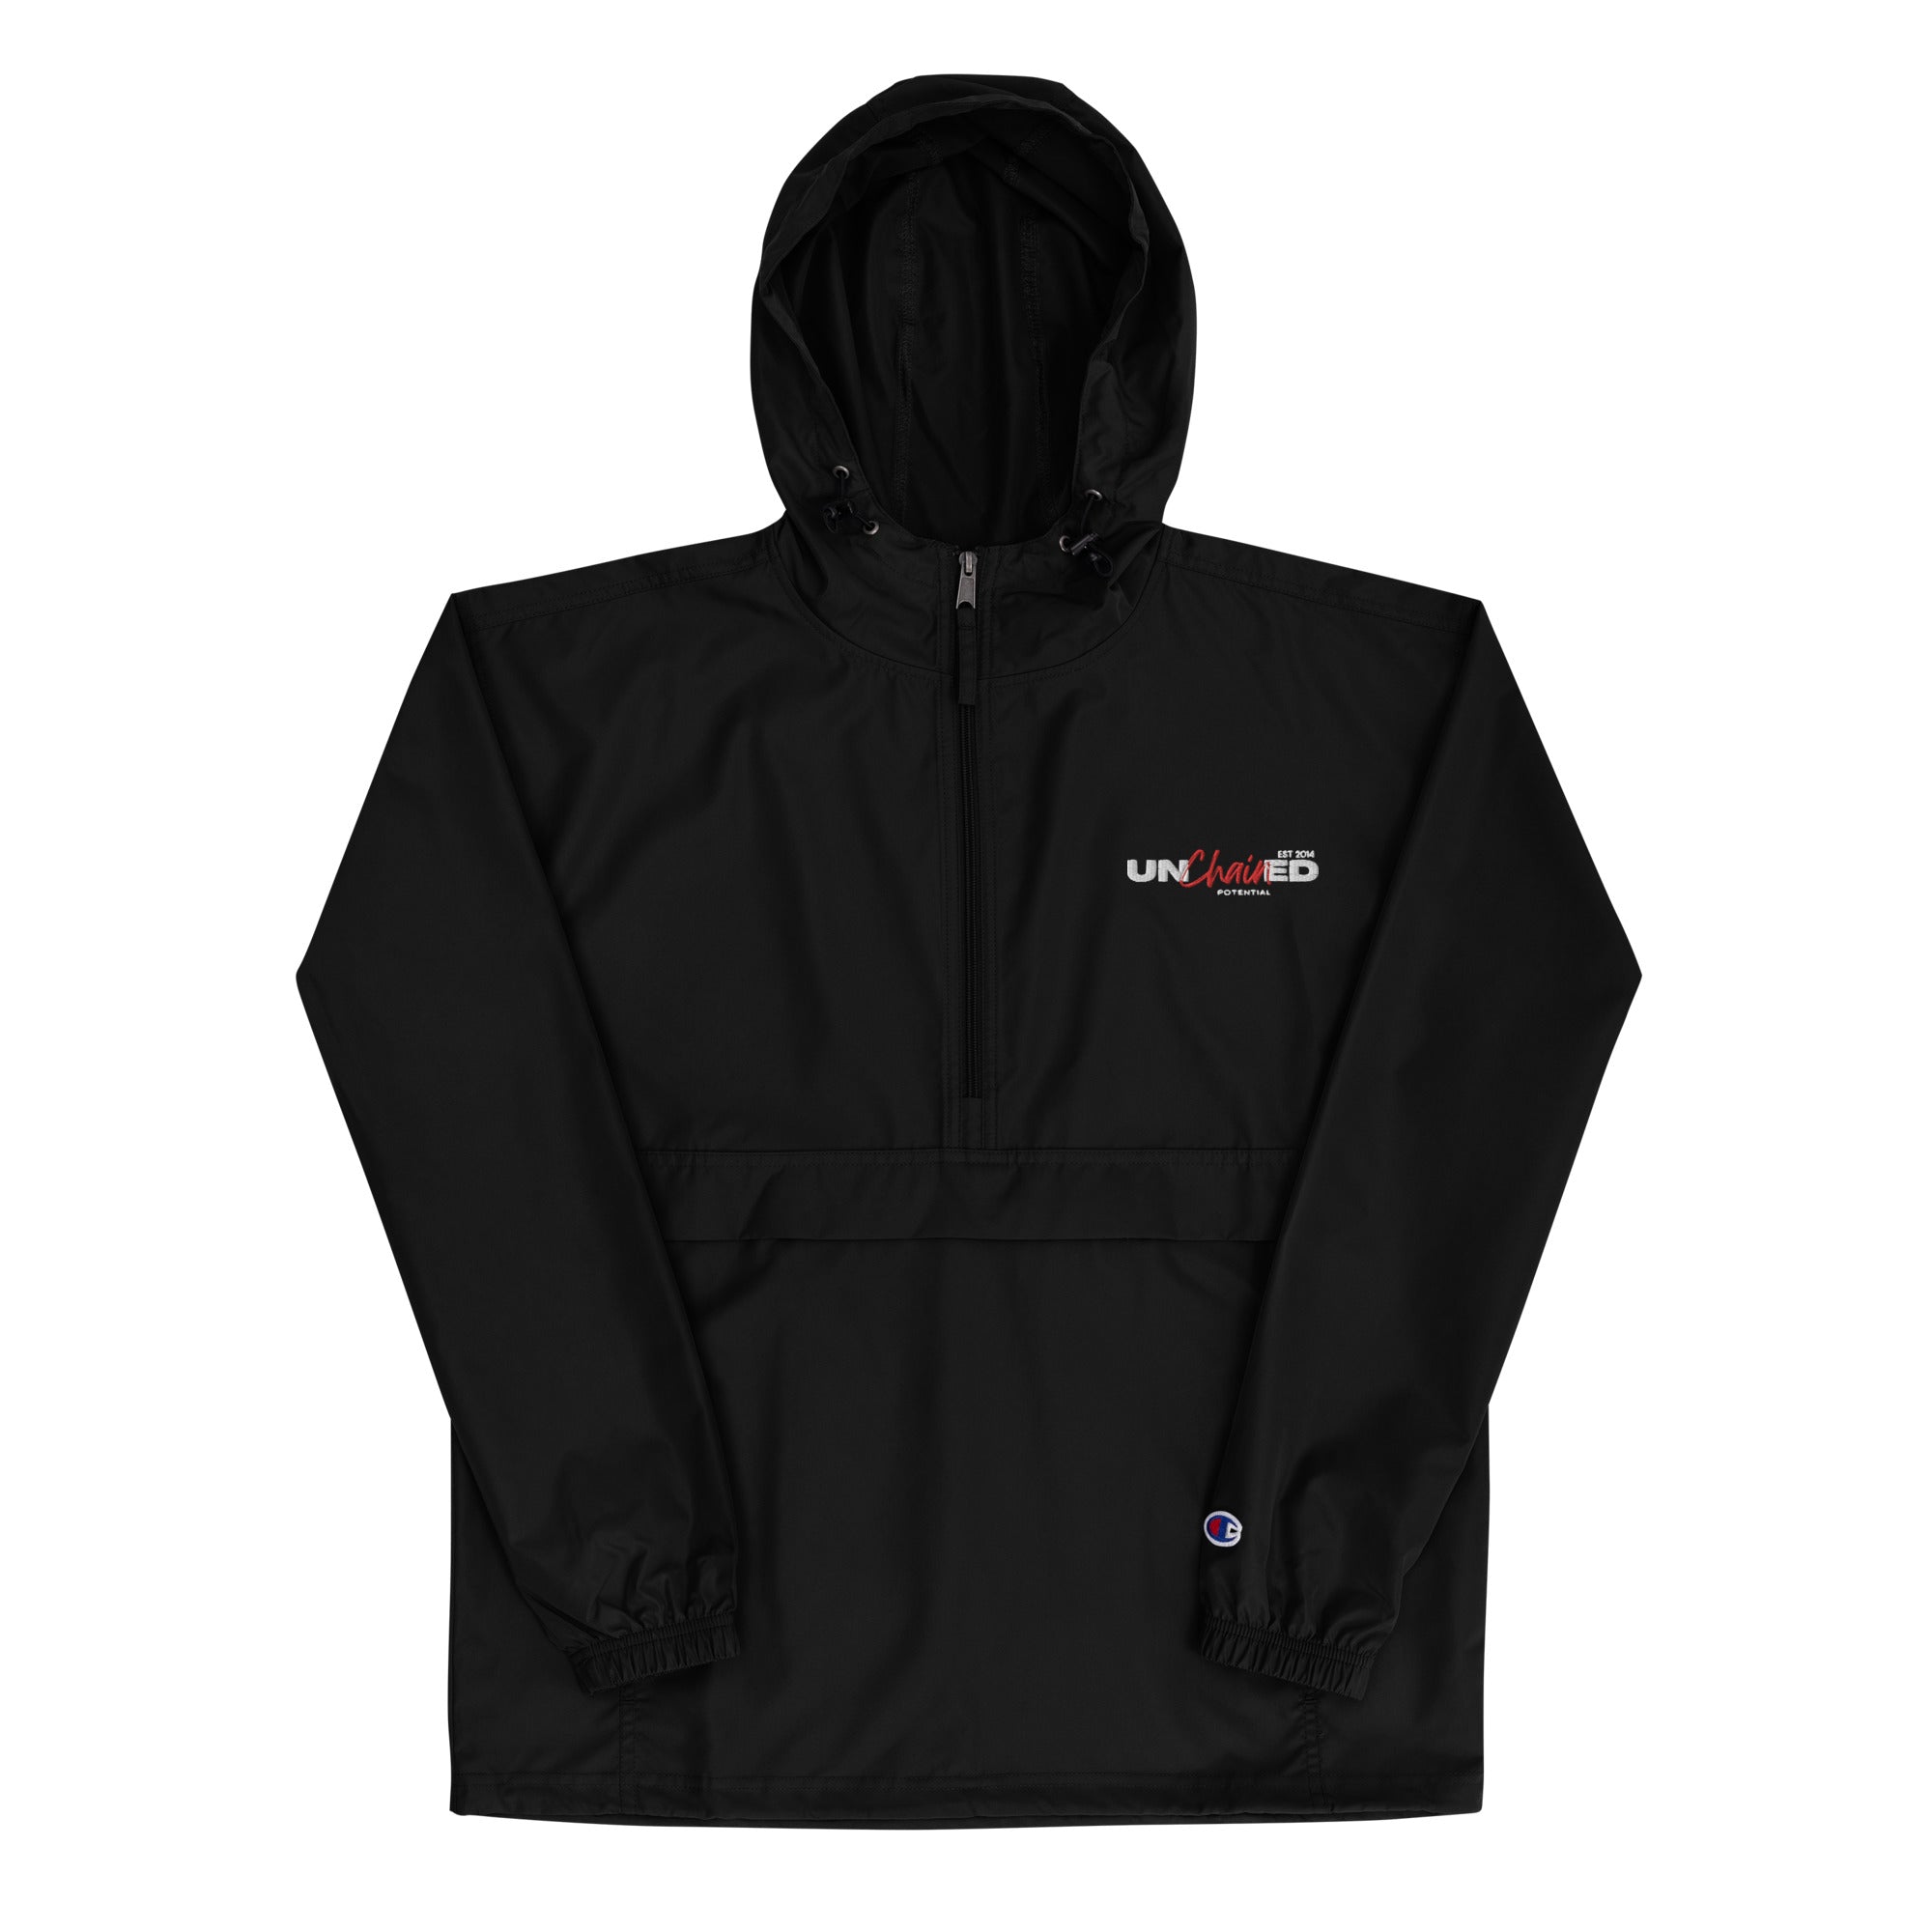 Unchained Potential Embroidered Champion Packable Jacket v2